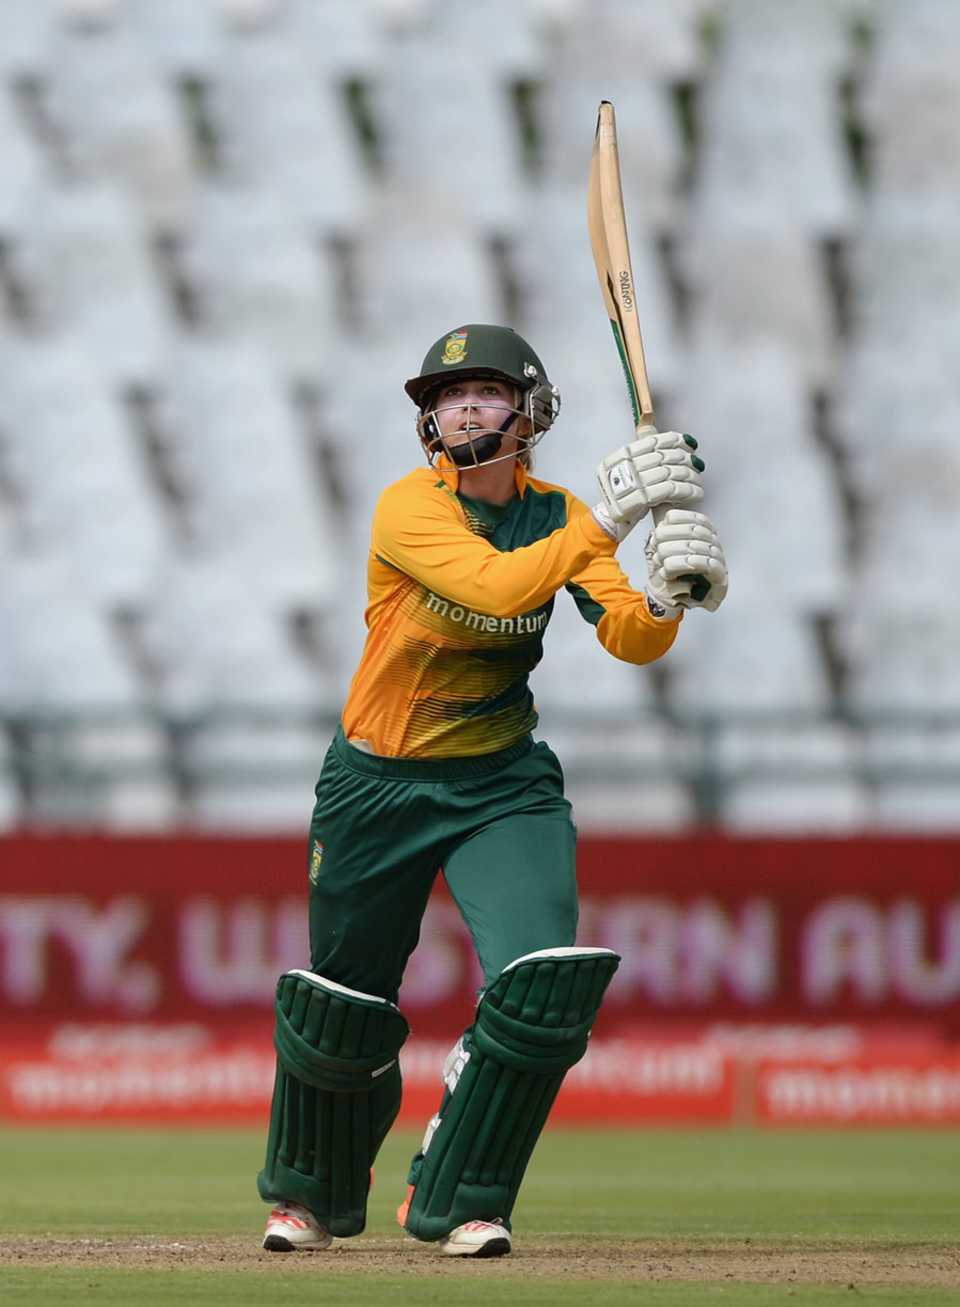 Dane van Niekerk launches one down the ground, South Africa Women v England Women, 2nd T20, Cape Town, February 19, 2016